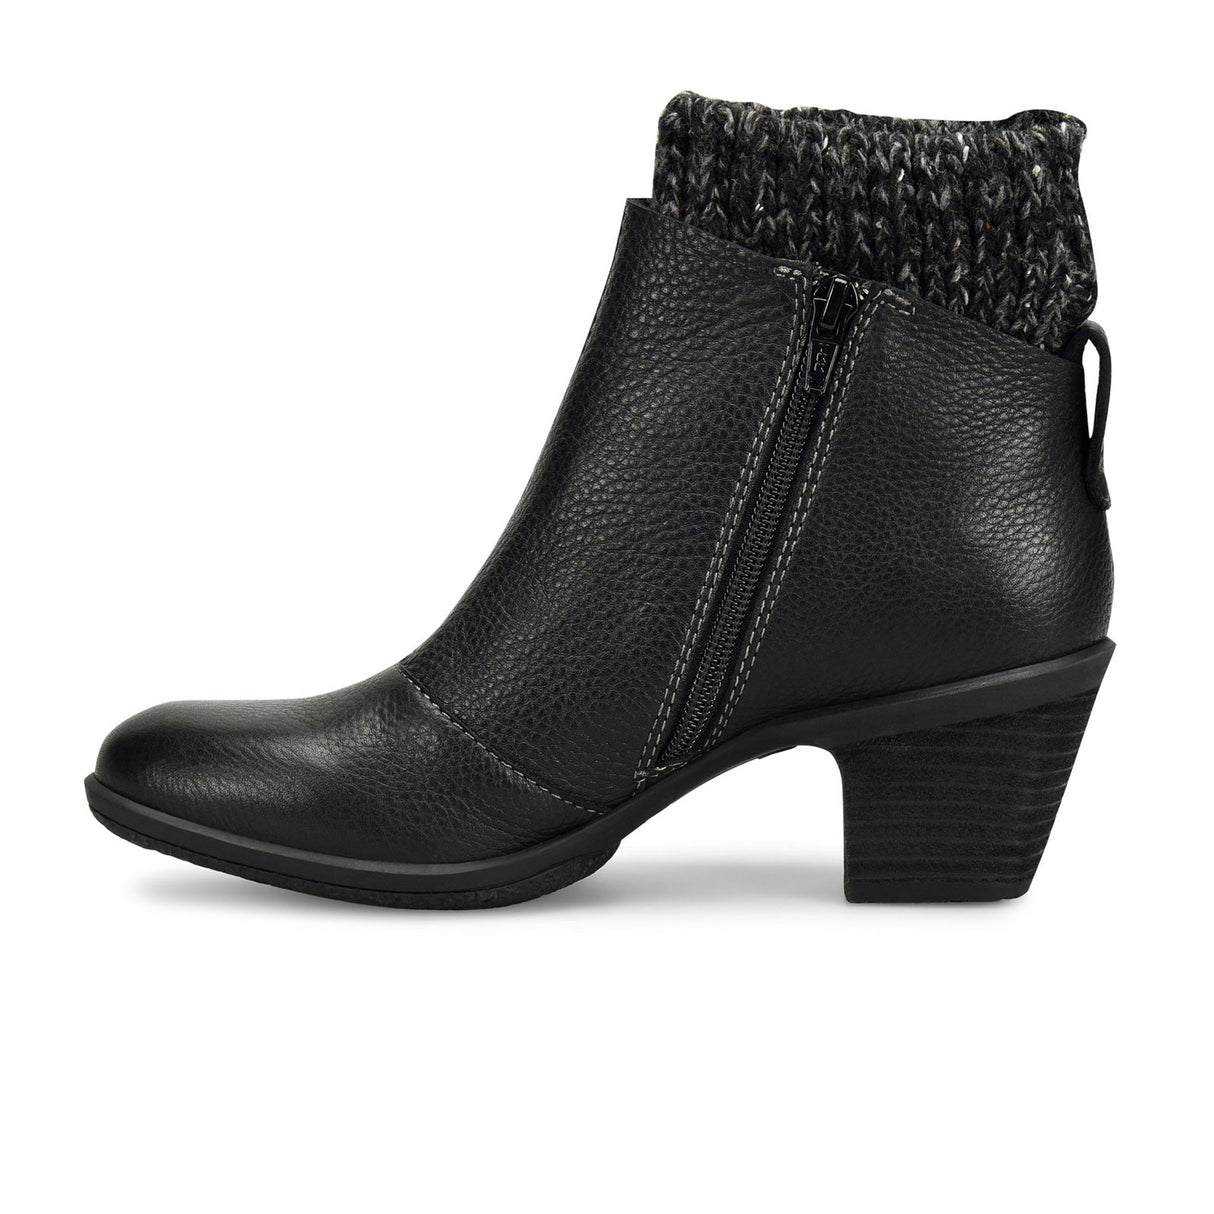 Comfortiva Brianne Ankle Boot (Women) - Black Boots - Fashion - Ankle Boot - The Heel Shoe Fitters